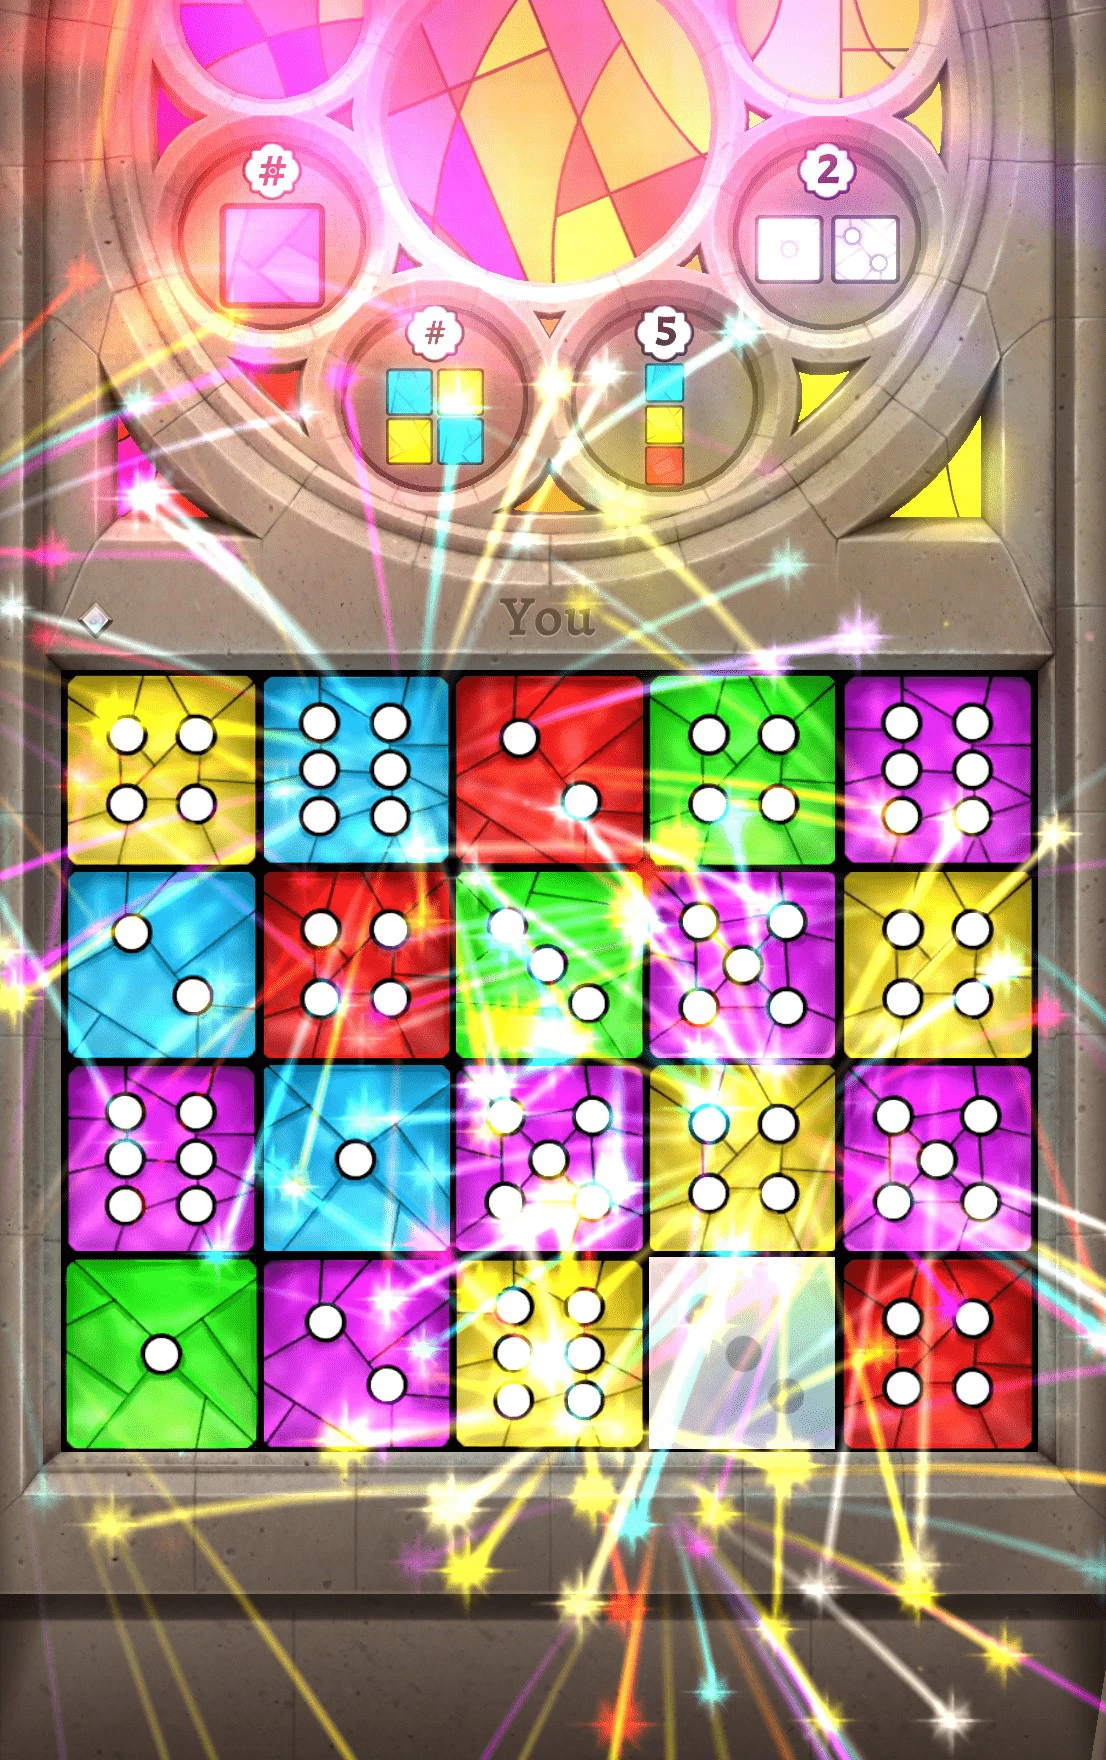 fireworks shooting out from the dice grid to signify the game has ended